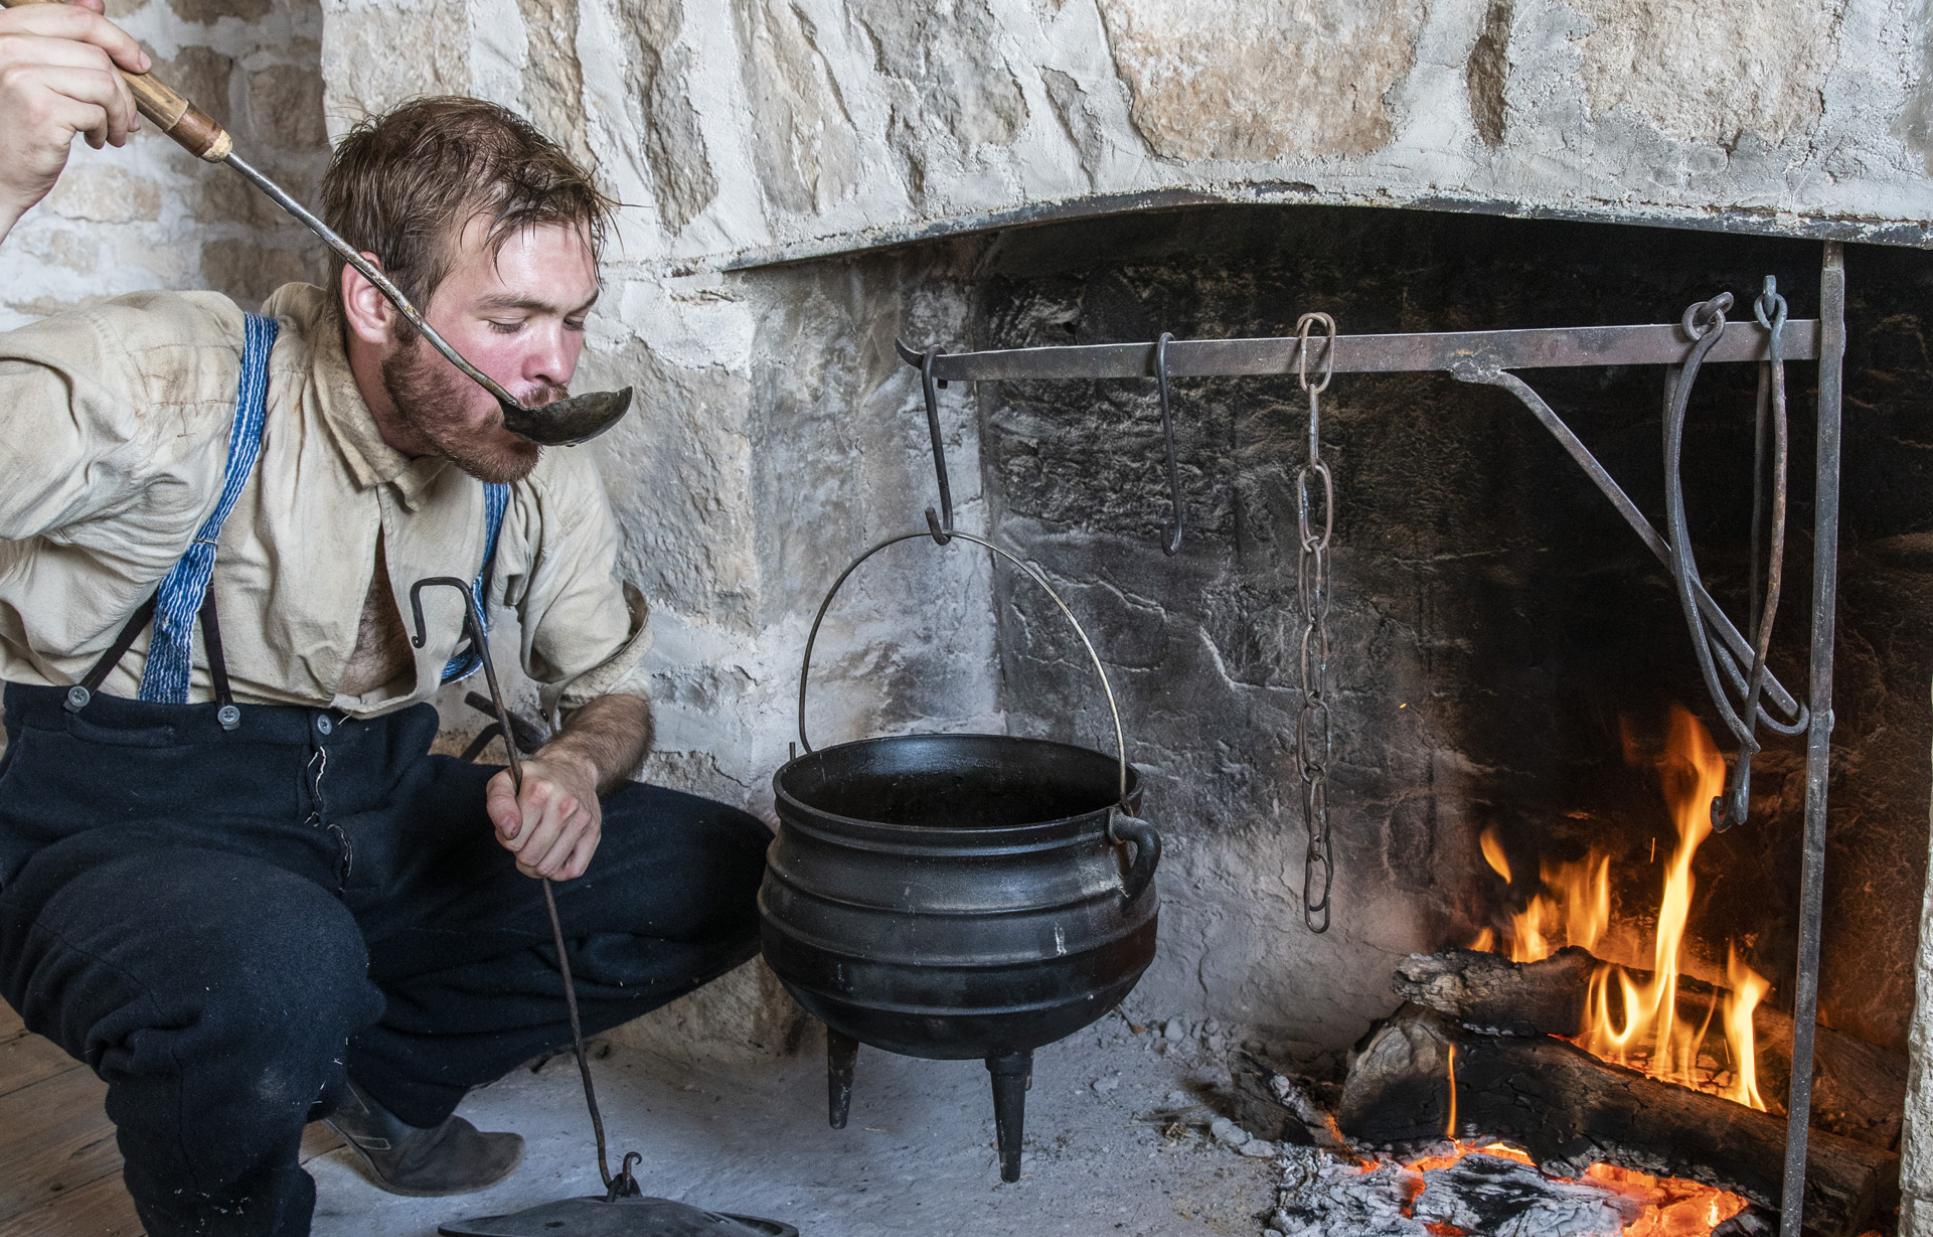 Site educator demonstrating cooking on an open hearth